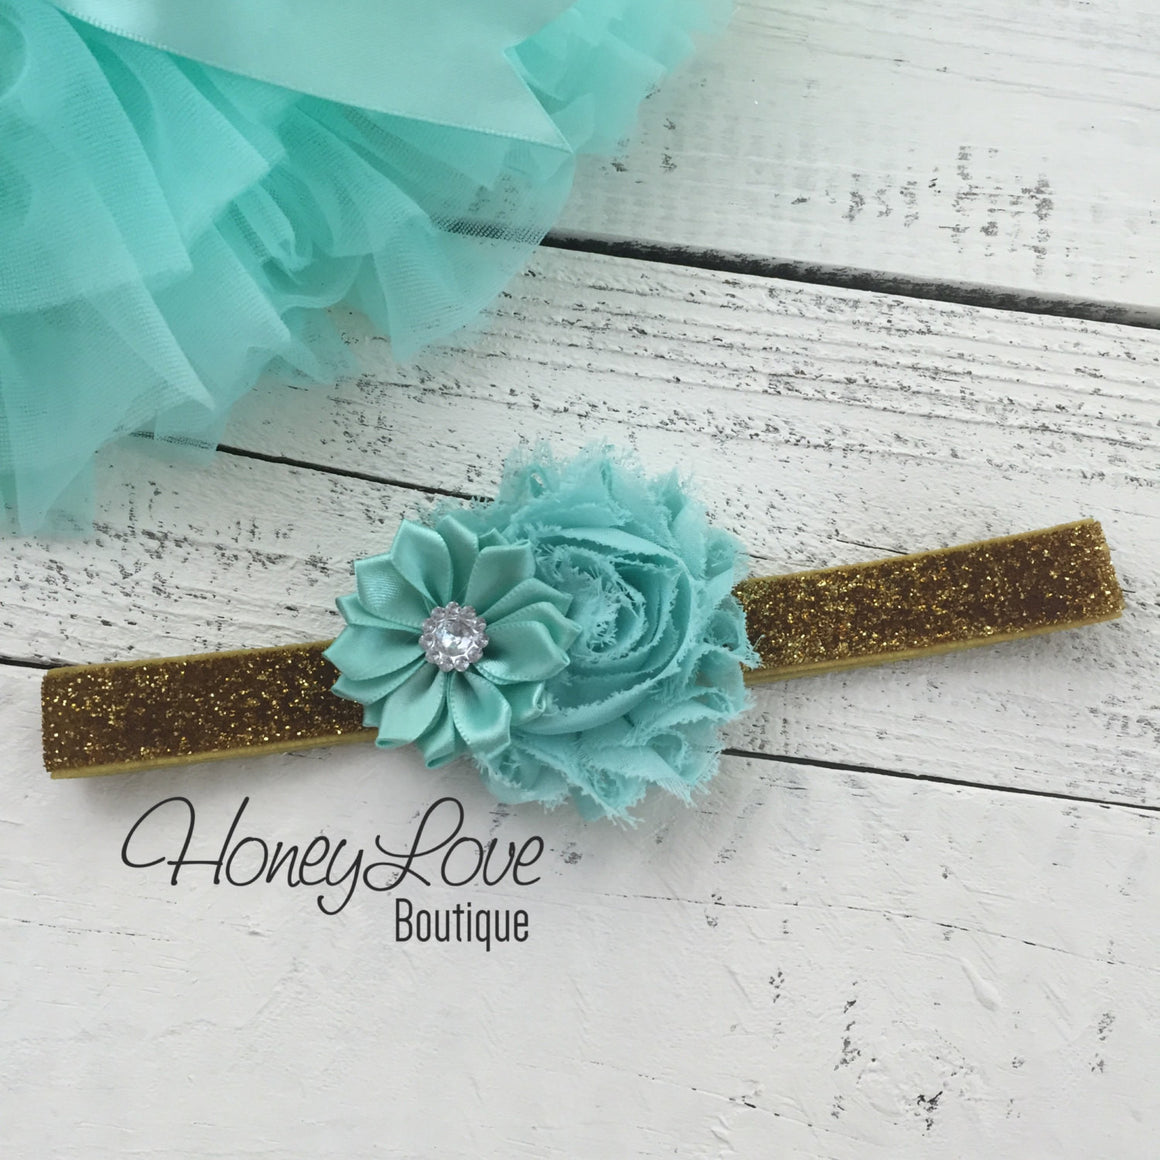 PERSONALIZED Name inside Heart - Gold/Silver Glitter and Mint/Aqua - HoneyLoveBoutique